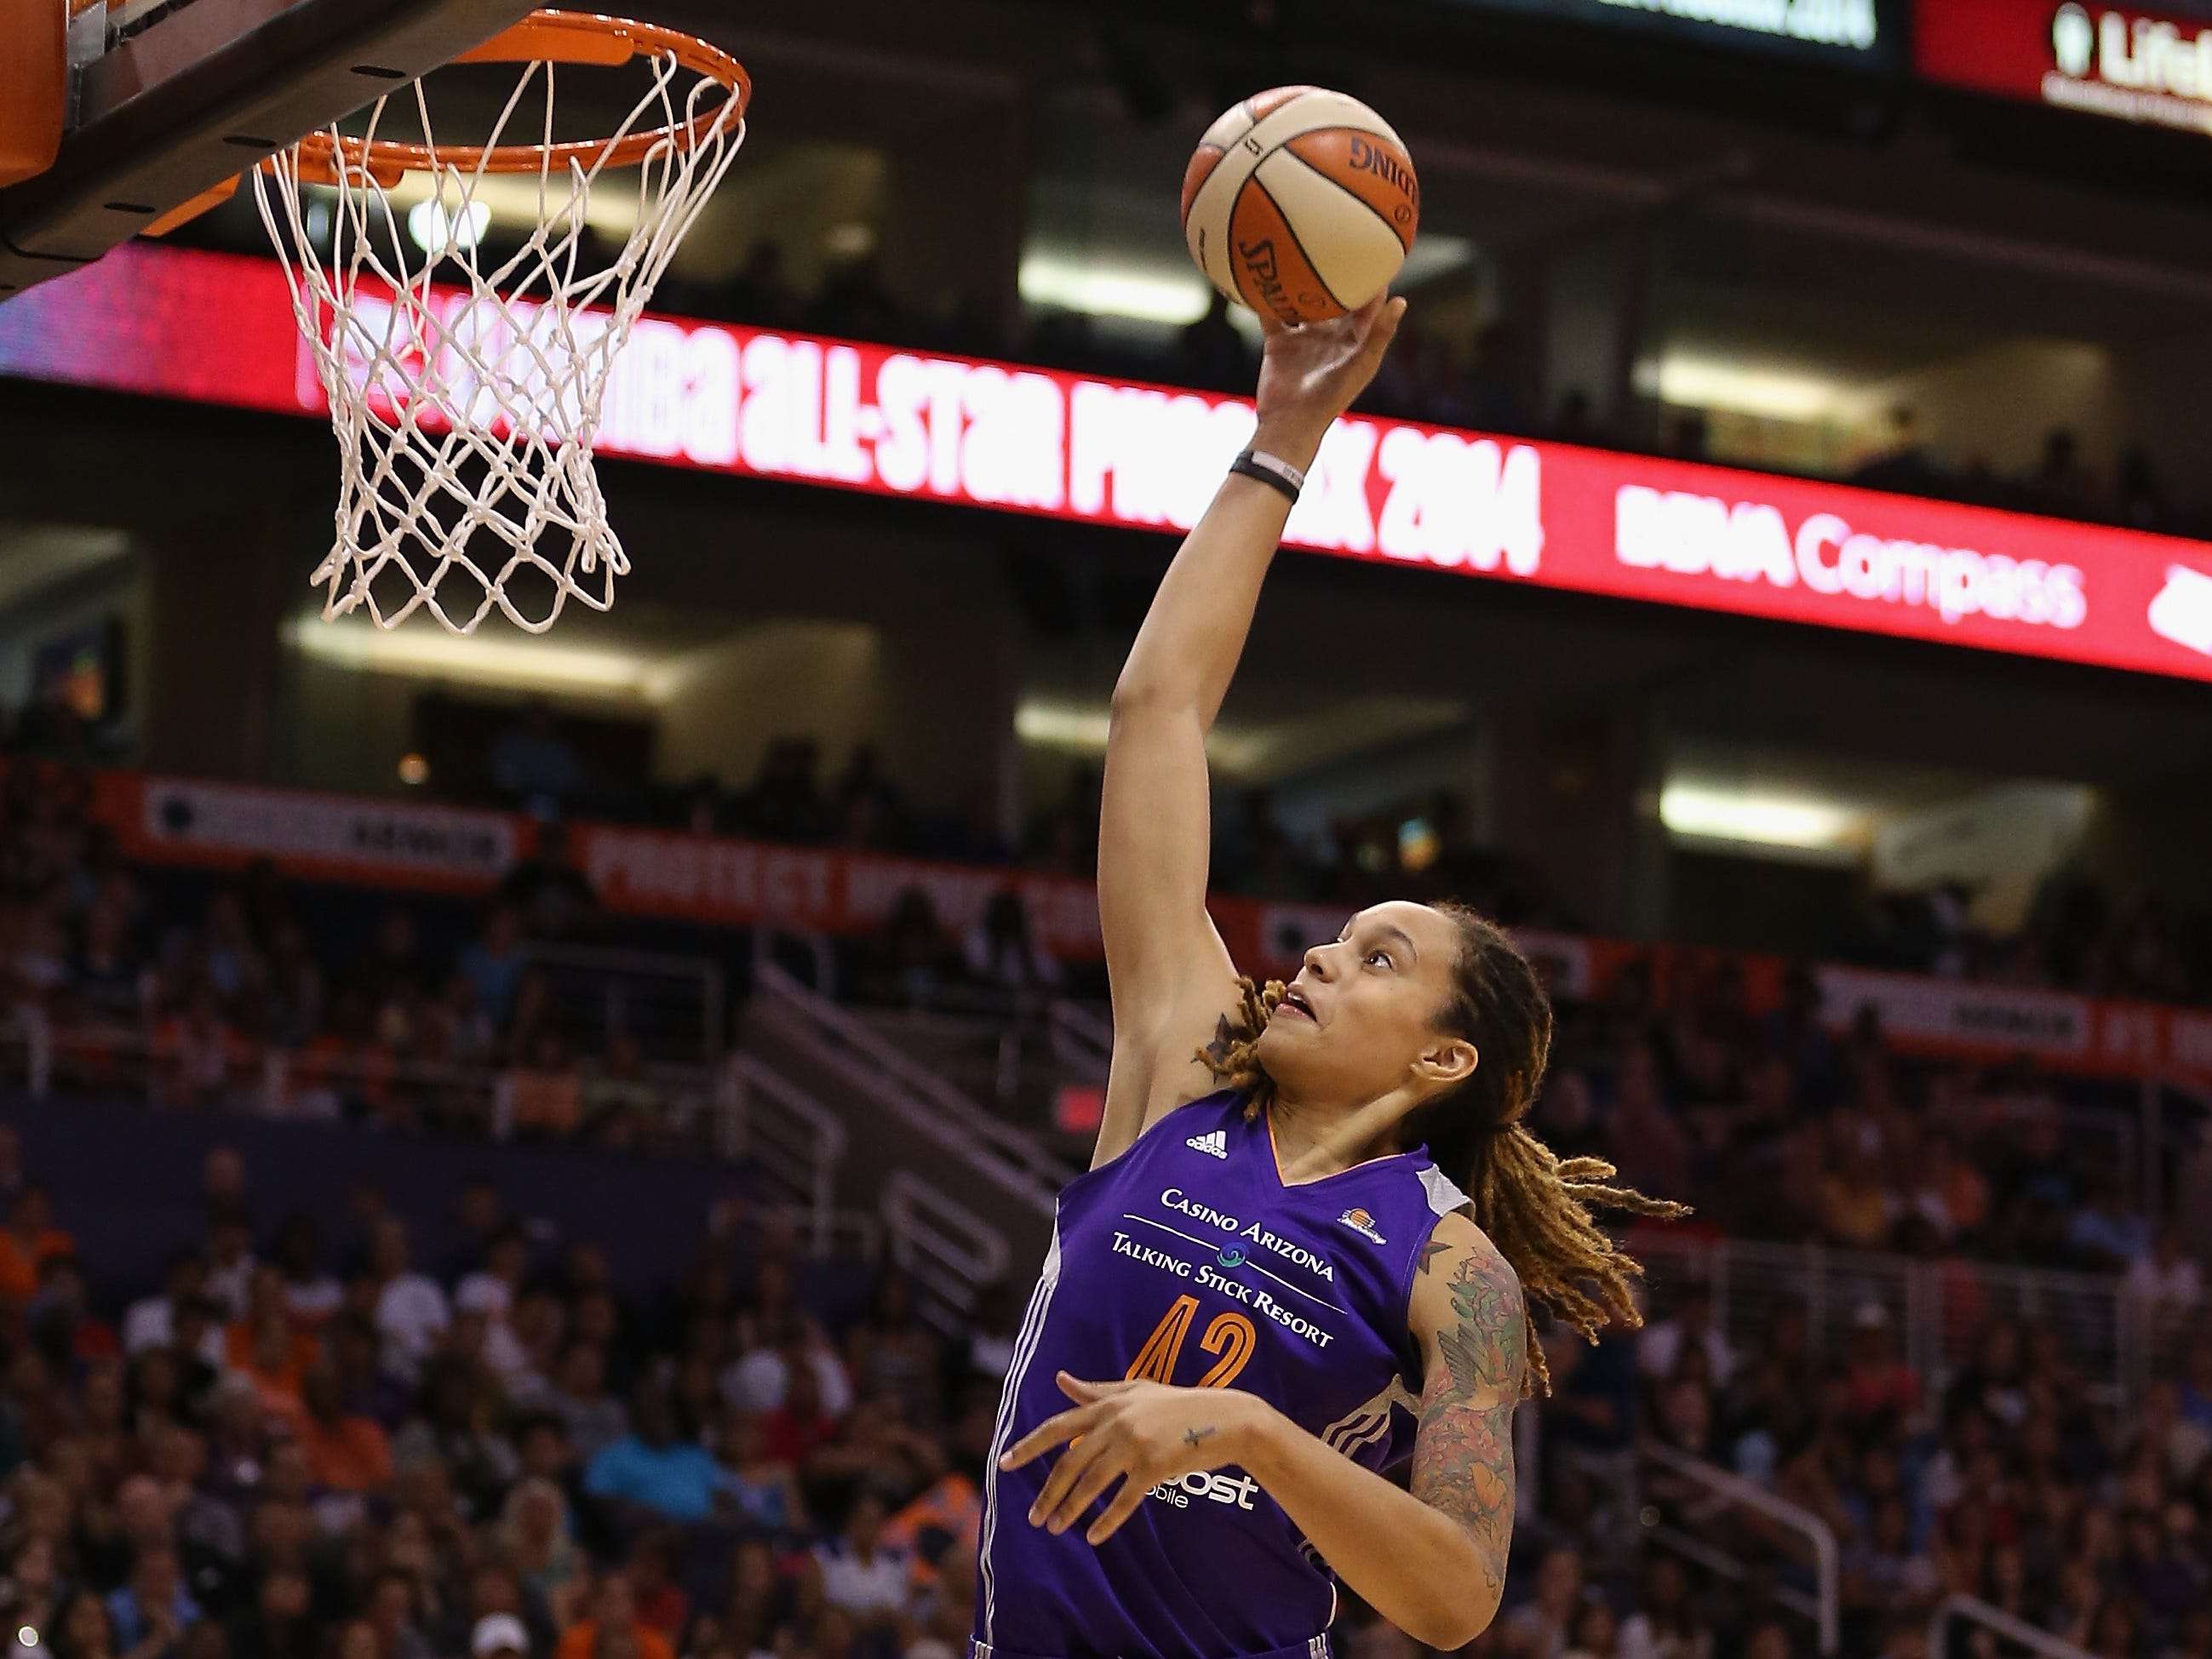 7 WNBA players have dunked in the 